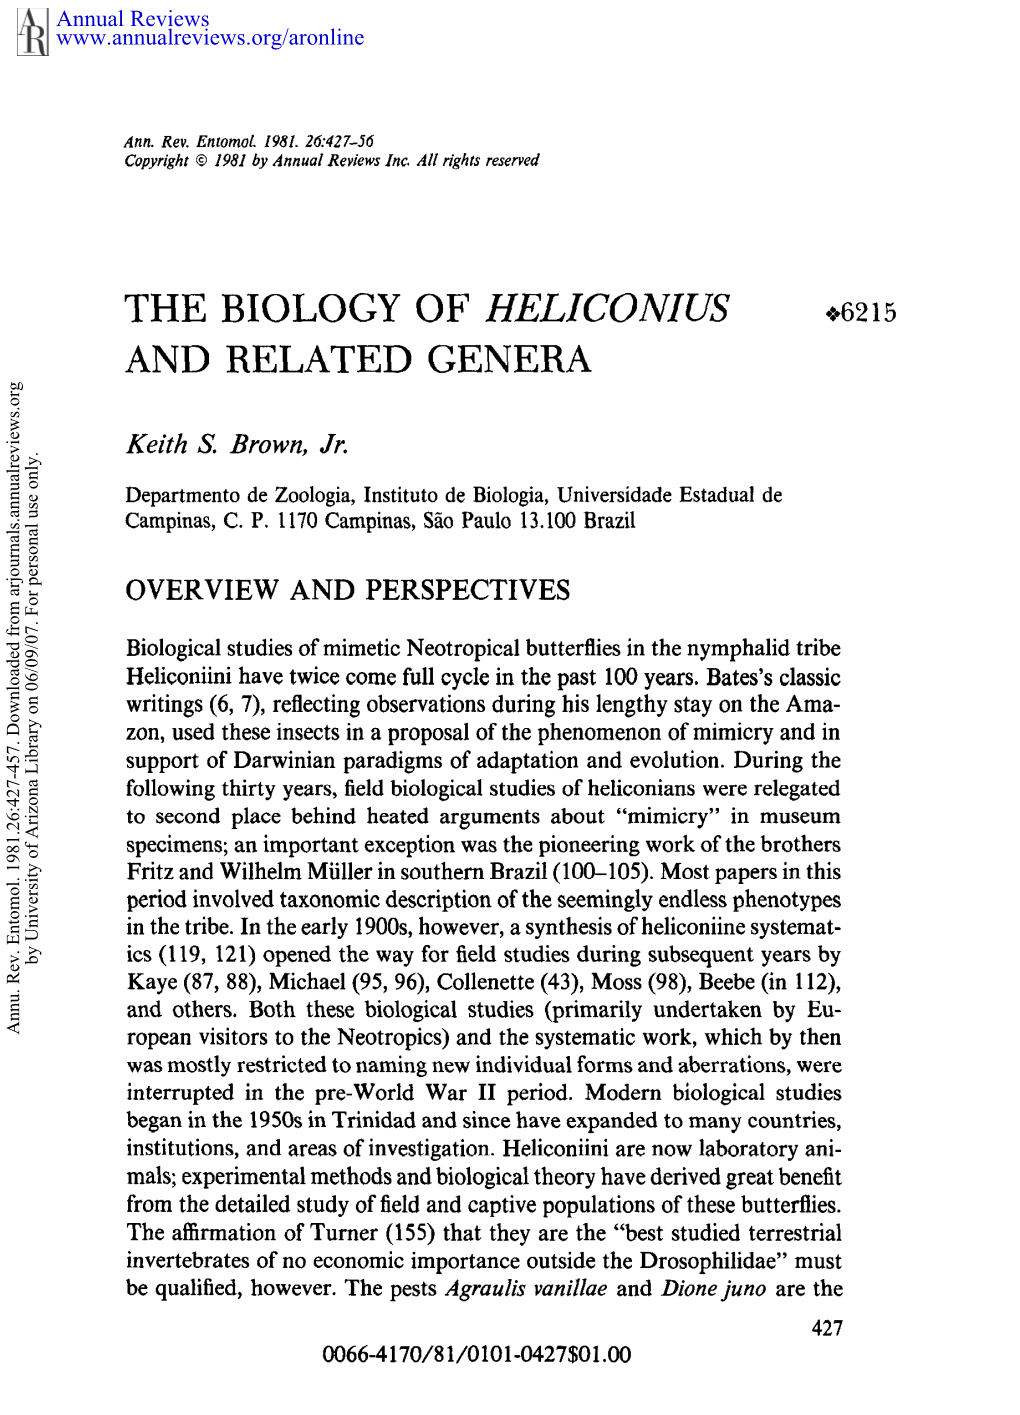 The Biology of Heliconius and Related Genera